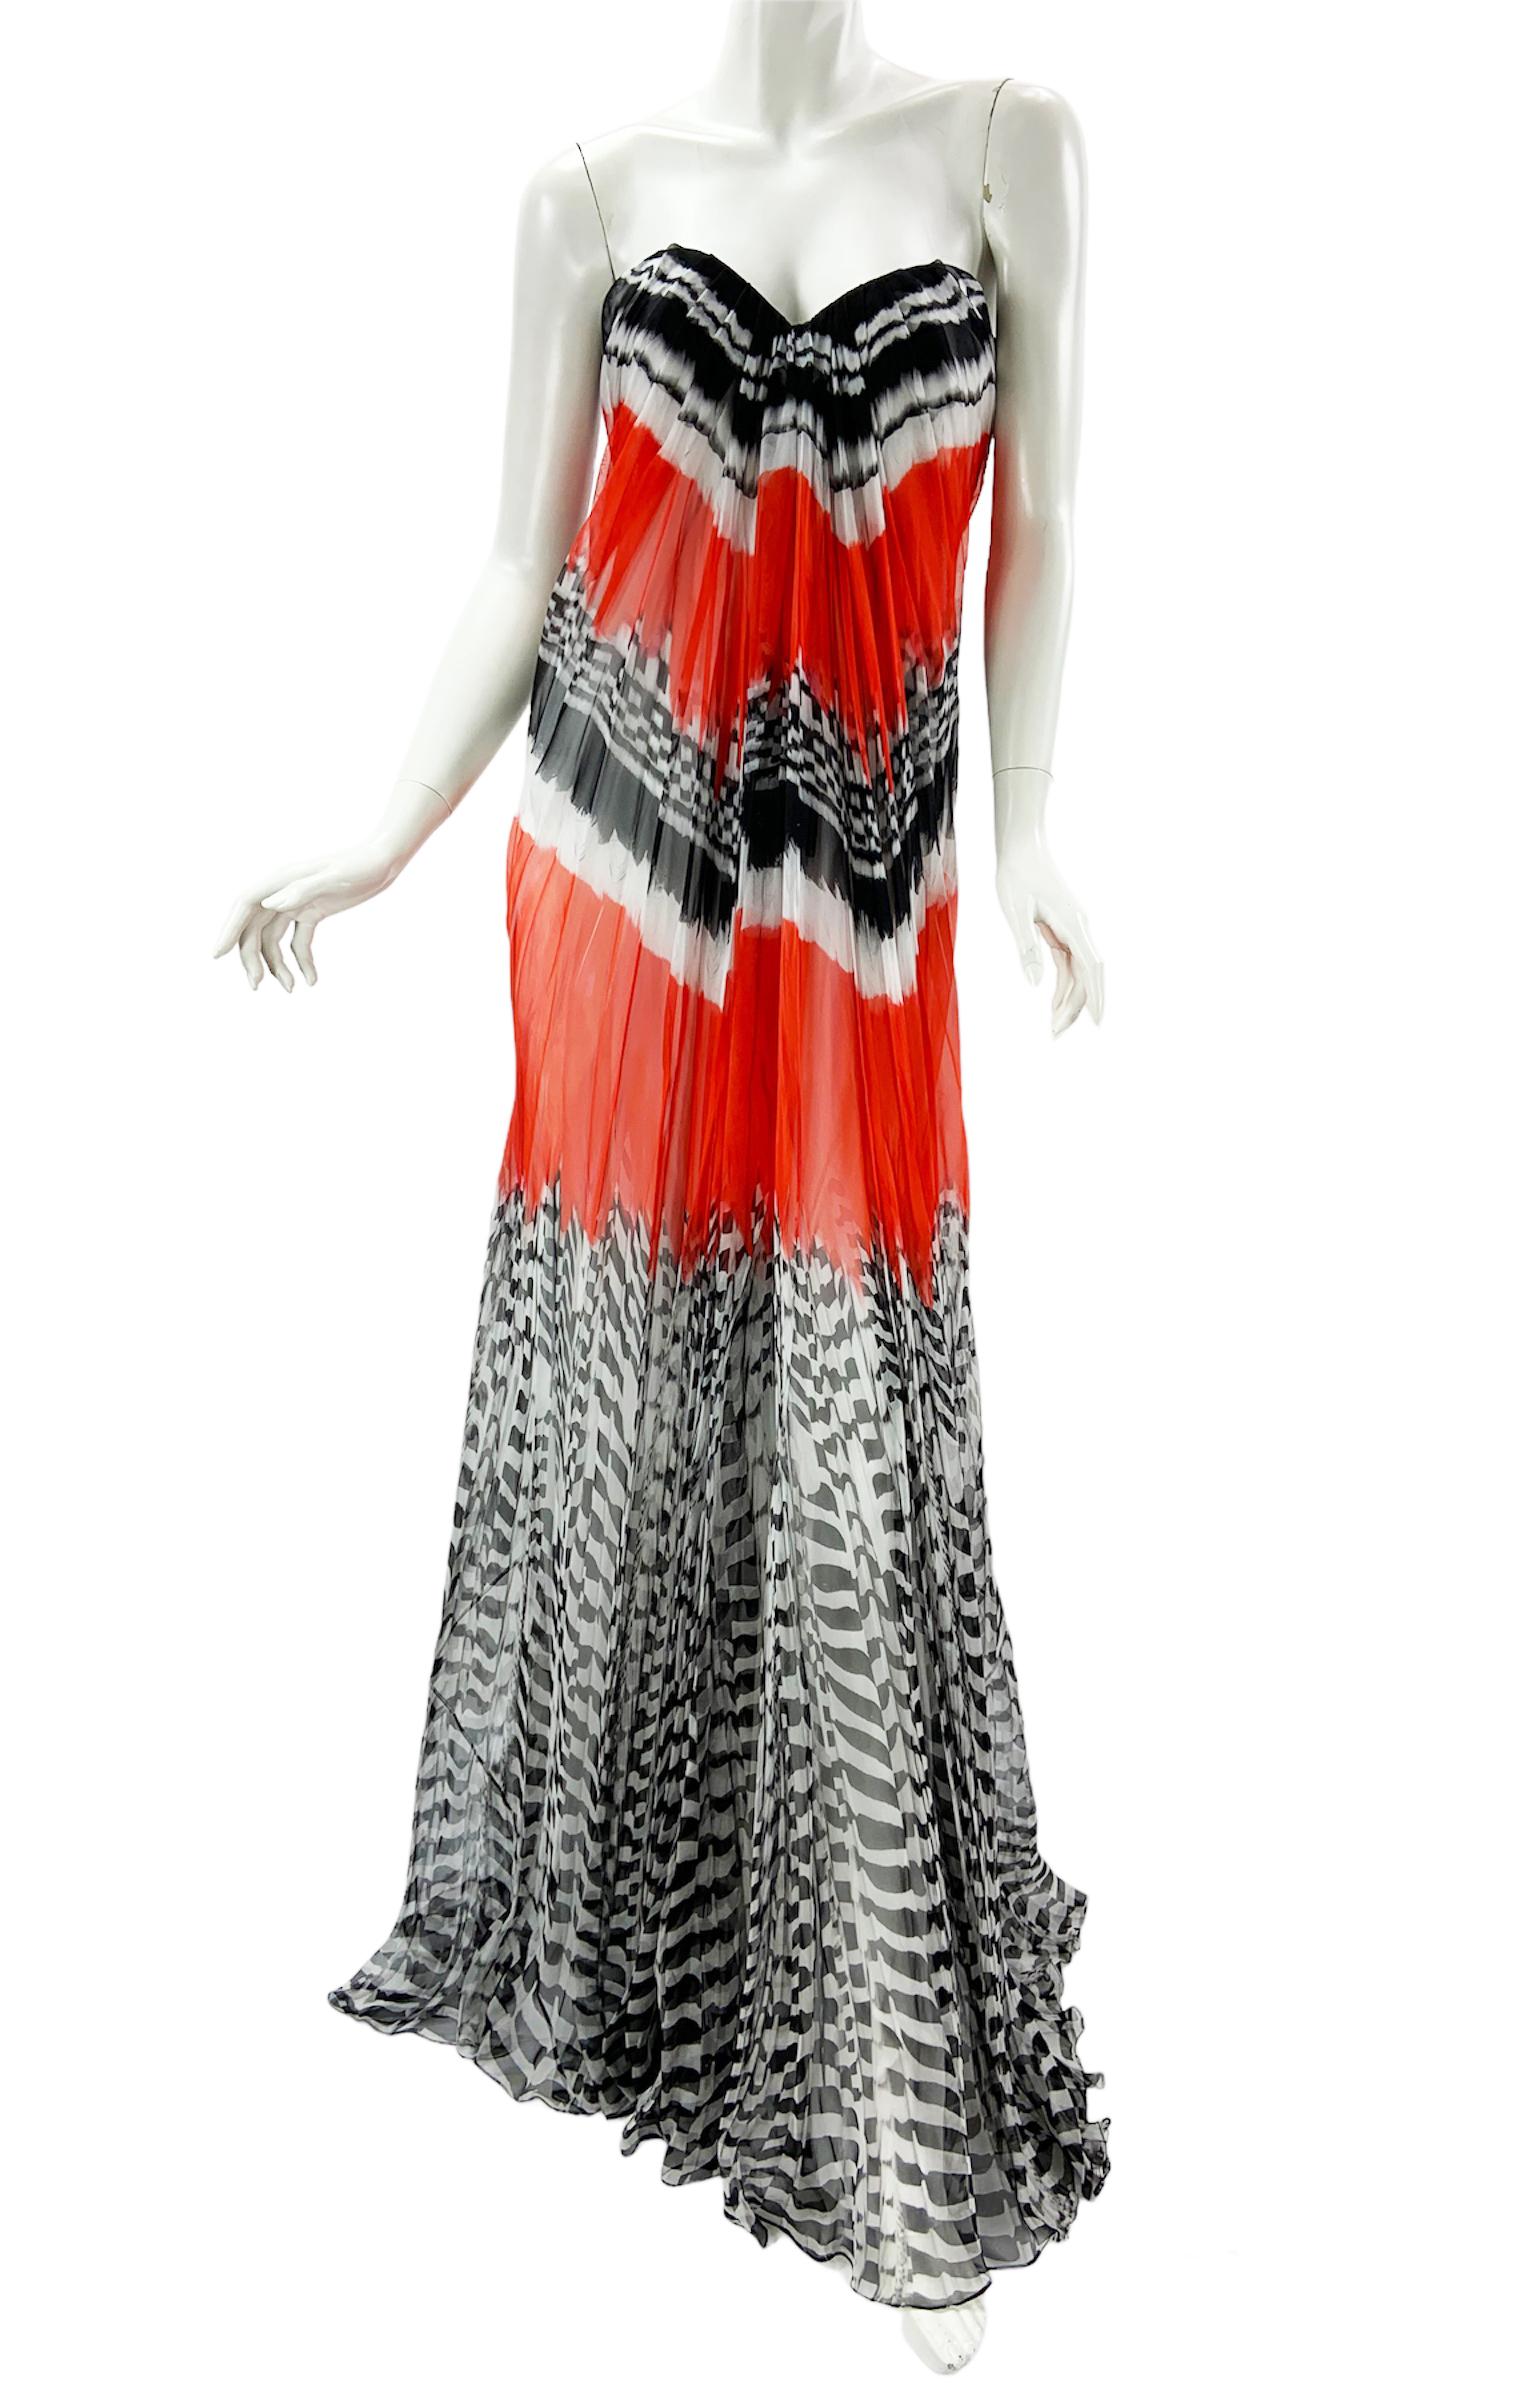 NWT Alexander McQueen Silk Feather Print Maxi Dress Gown
S/S 2014 Collection
Italian size 46 - US 10 (please check measurements).
This feather print beautifully exemplifies the tribal vibe with a folkloric touch. 
100% Silk, Finished with corset,